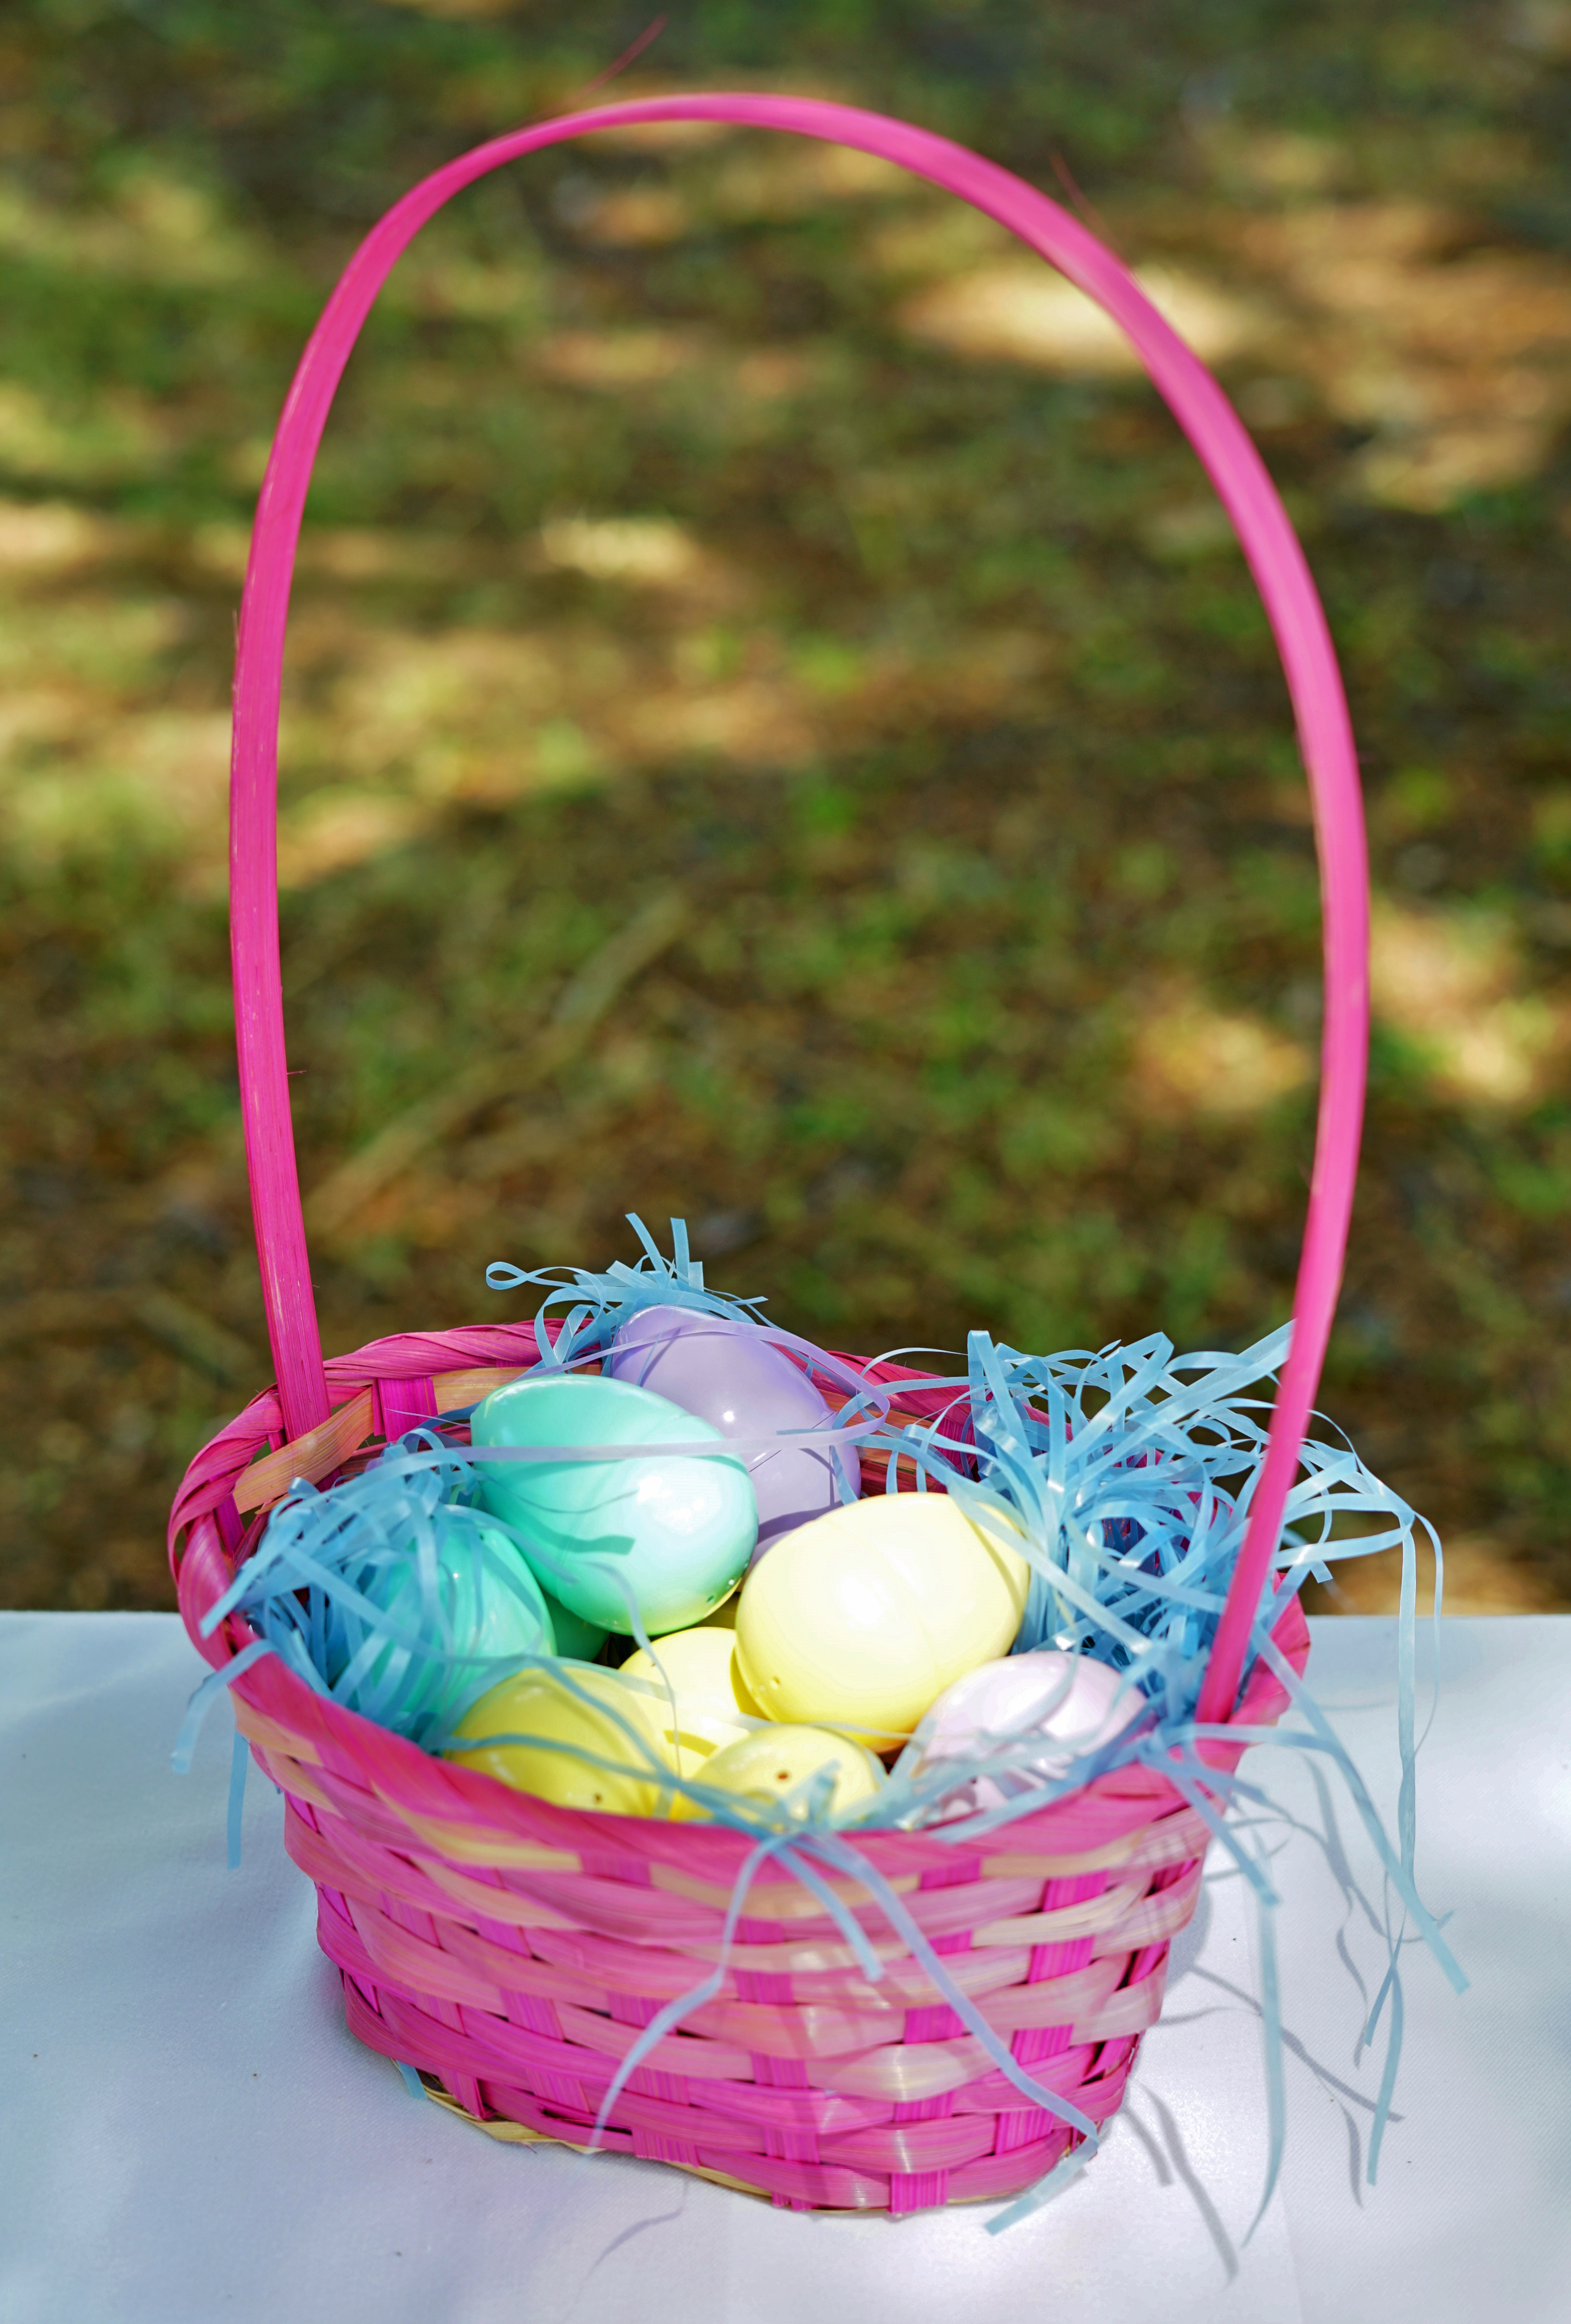 Colorful pink wicker baskets filled with Easter eggs